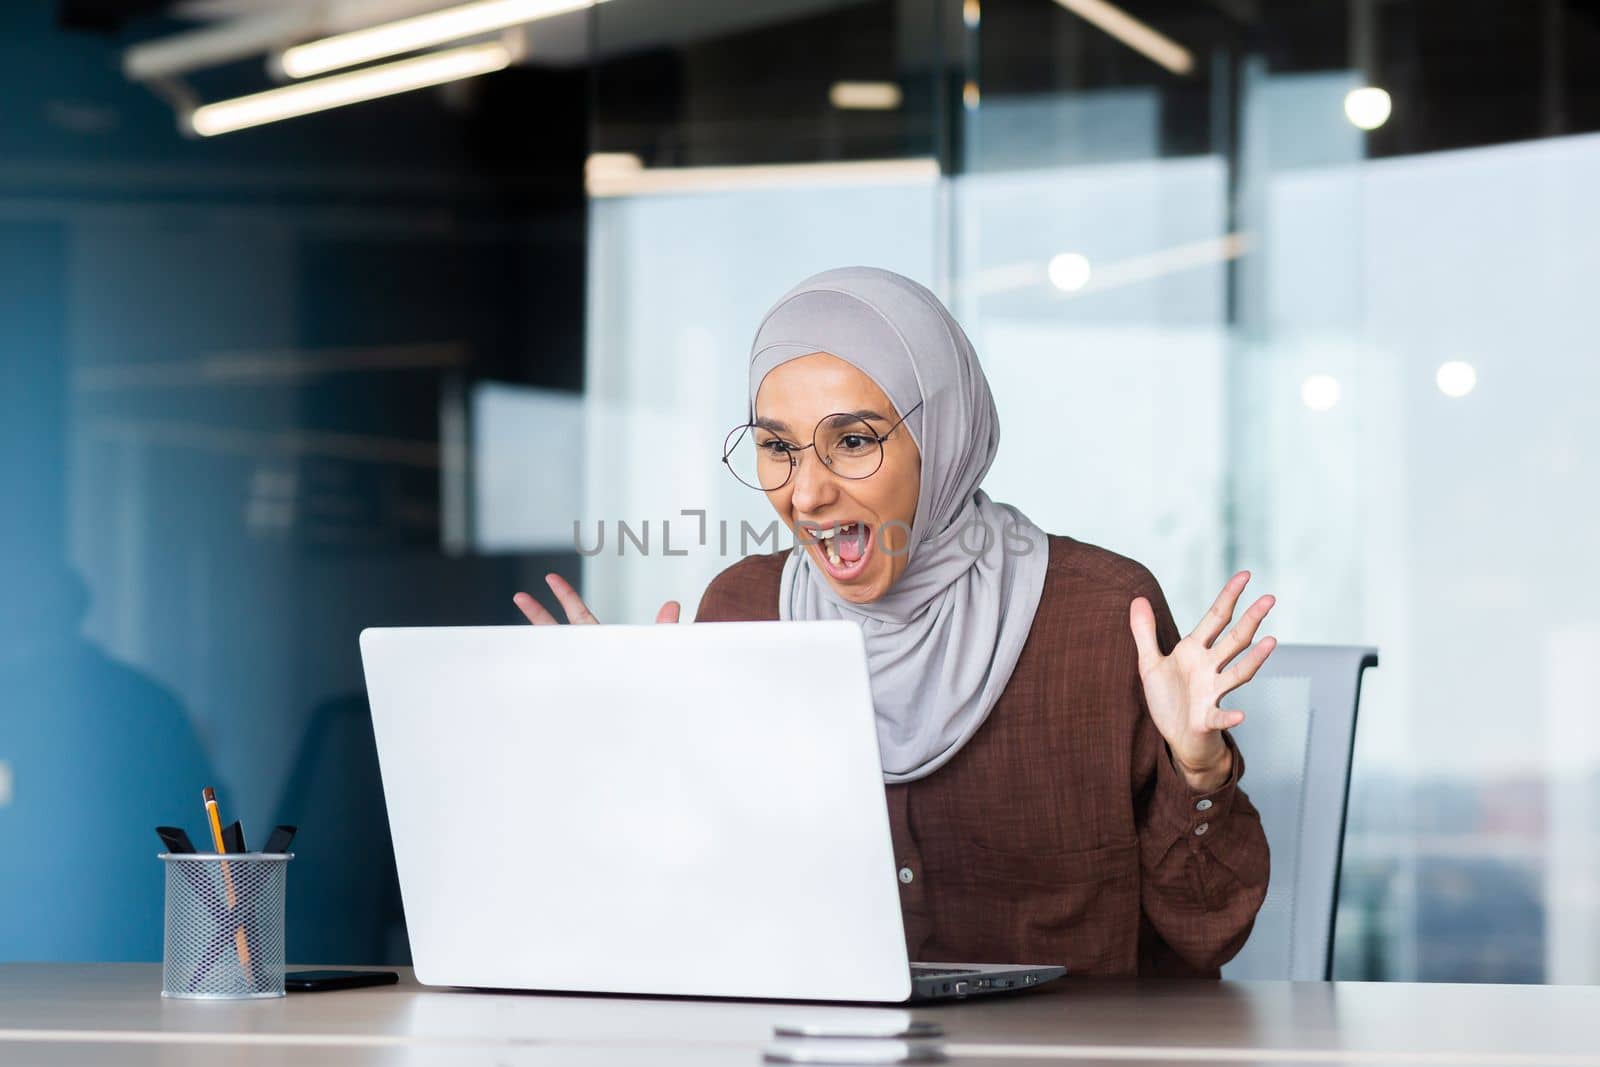 Successful businesswoman in hijab celebrating victory and successful achievement of results, woman looking at laptop screen and holding hands up in win and triumph gesture by voronaman